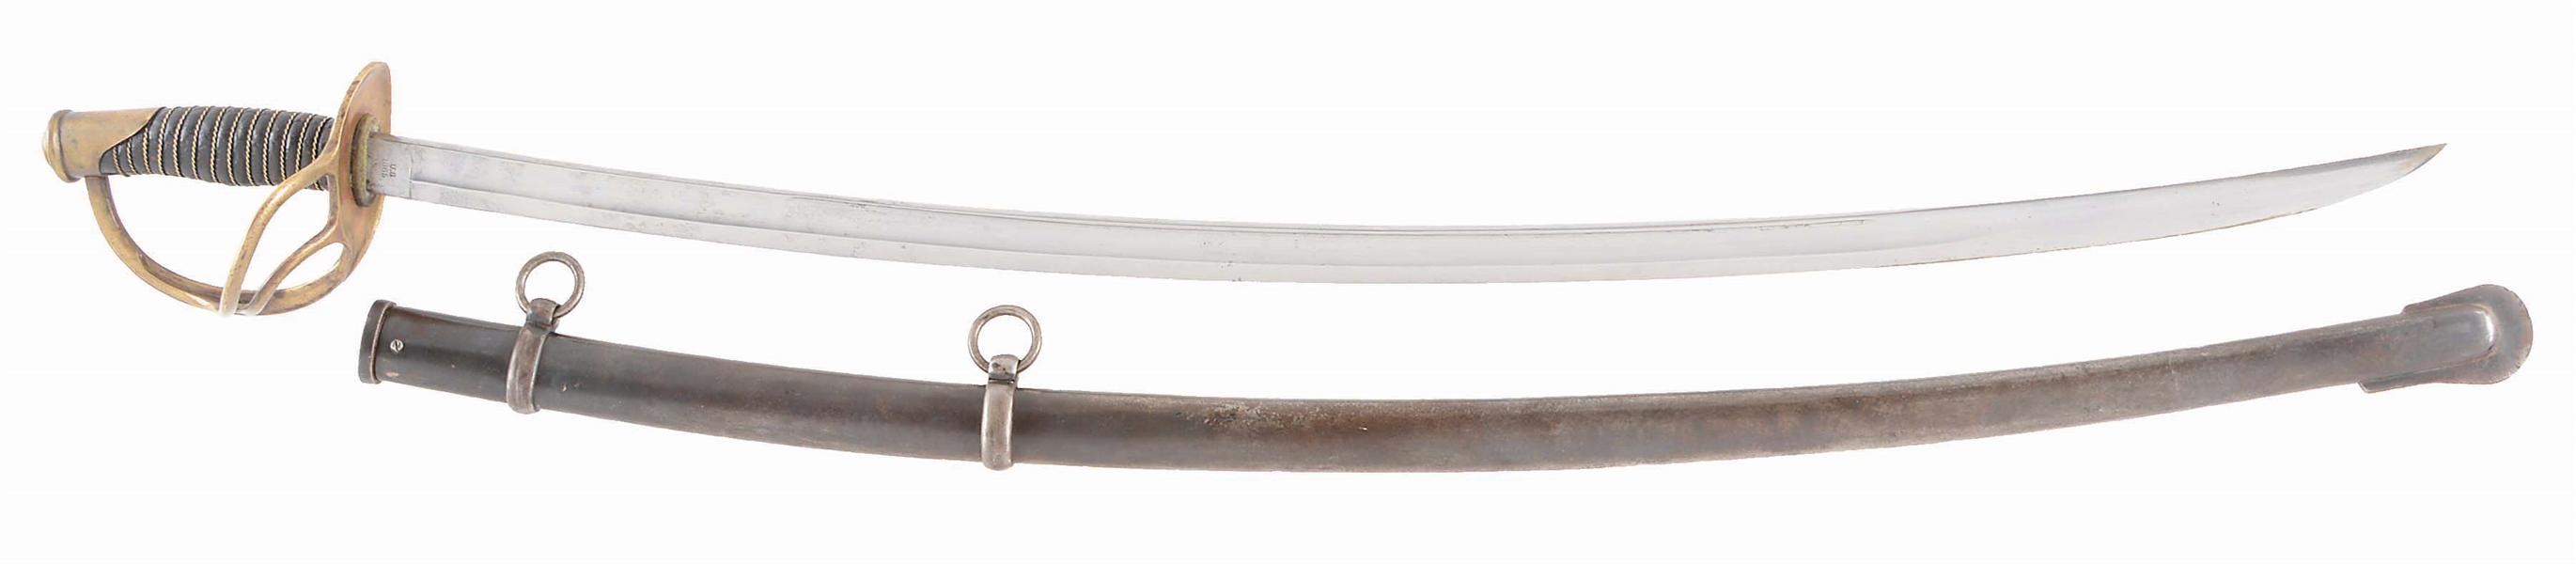 ROBY MANUFACTURING 1865 DATED MODEL 1860 LIGHT CAVALRY SABER.